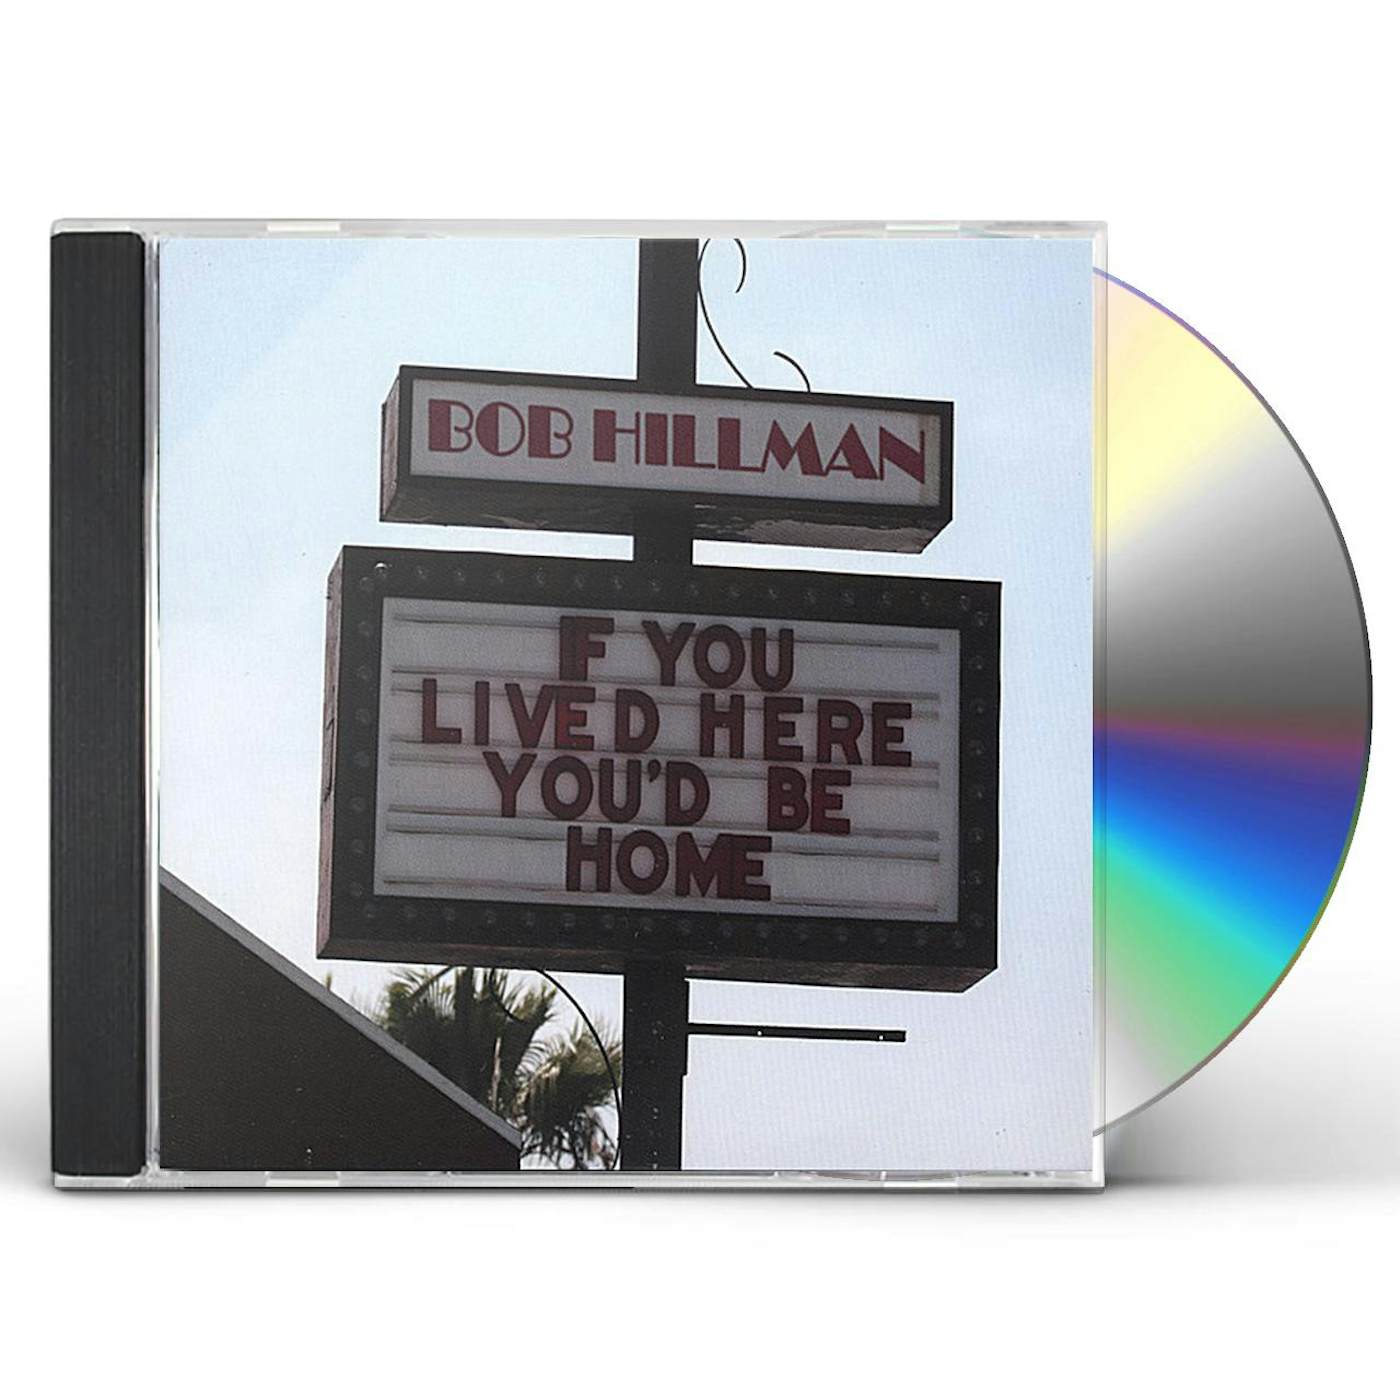 Bob Hillman IF YOU LIVED HERE YOU'D BE HOME CD